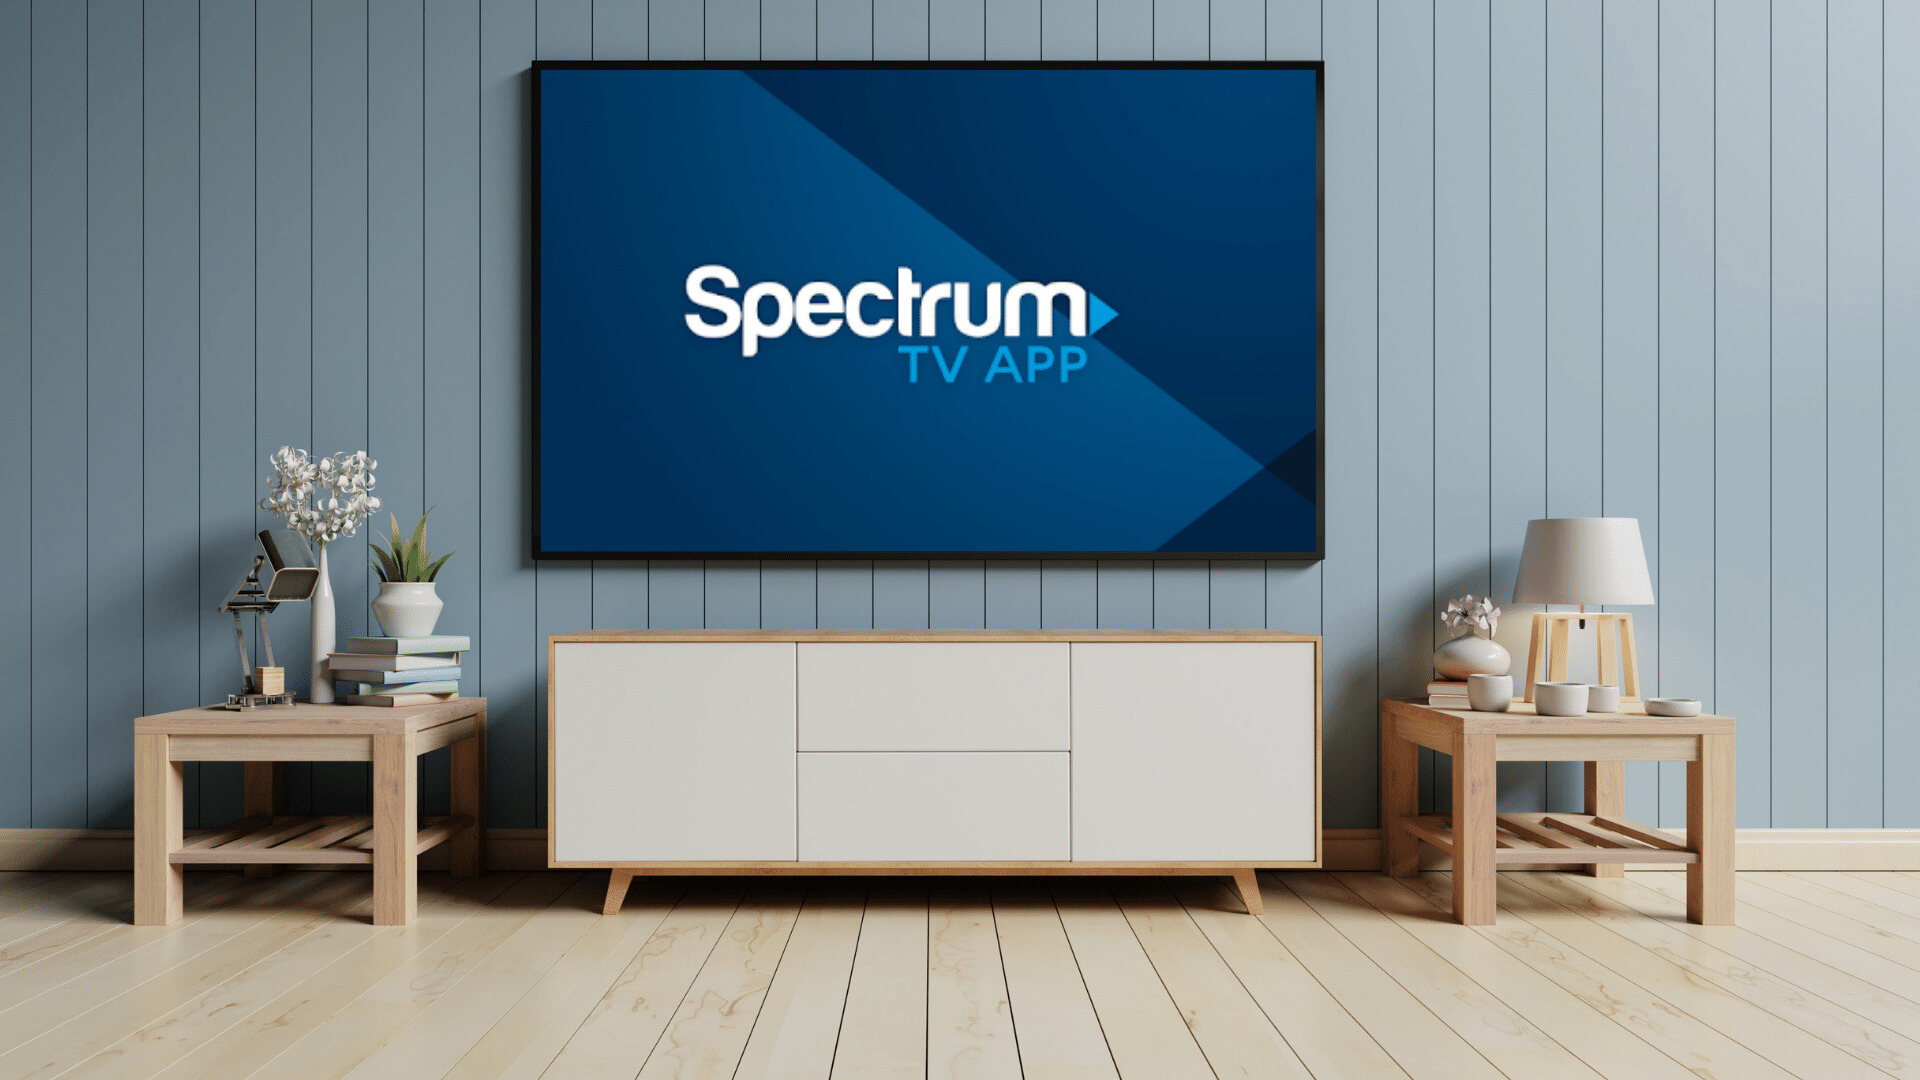 How To Download The Spectrum App On Firestick